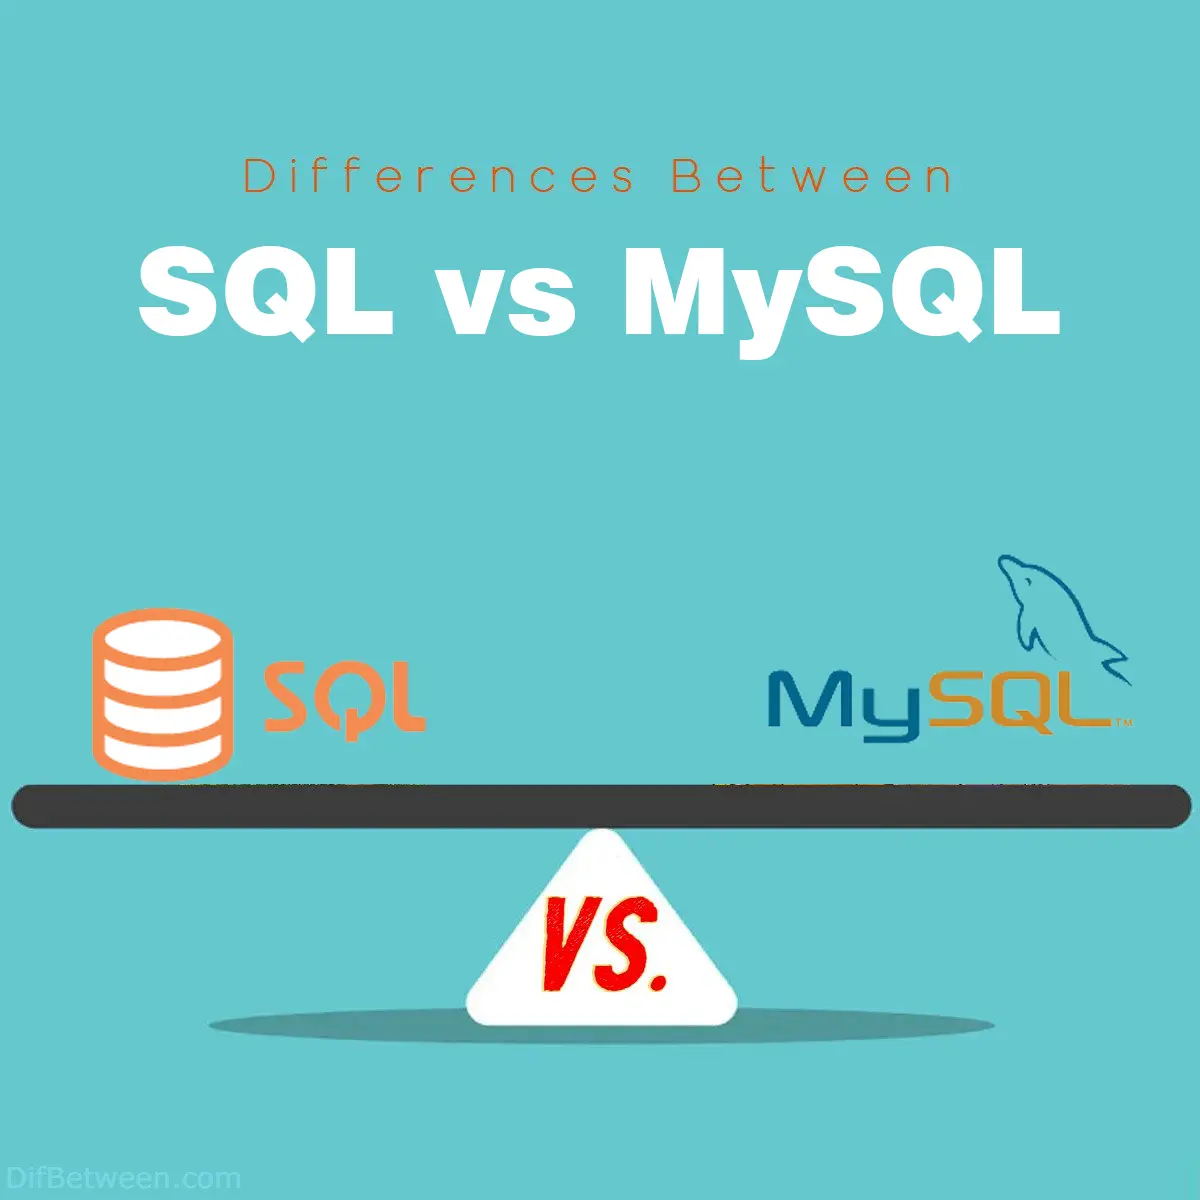 Differences Between SQL and MySQL